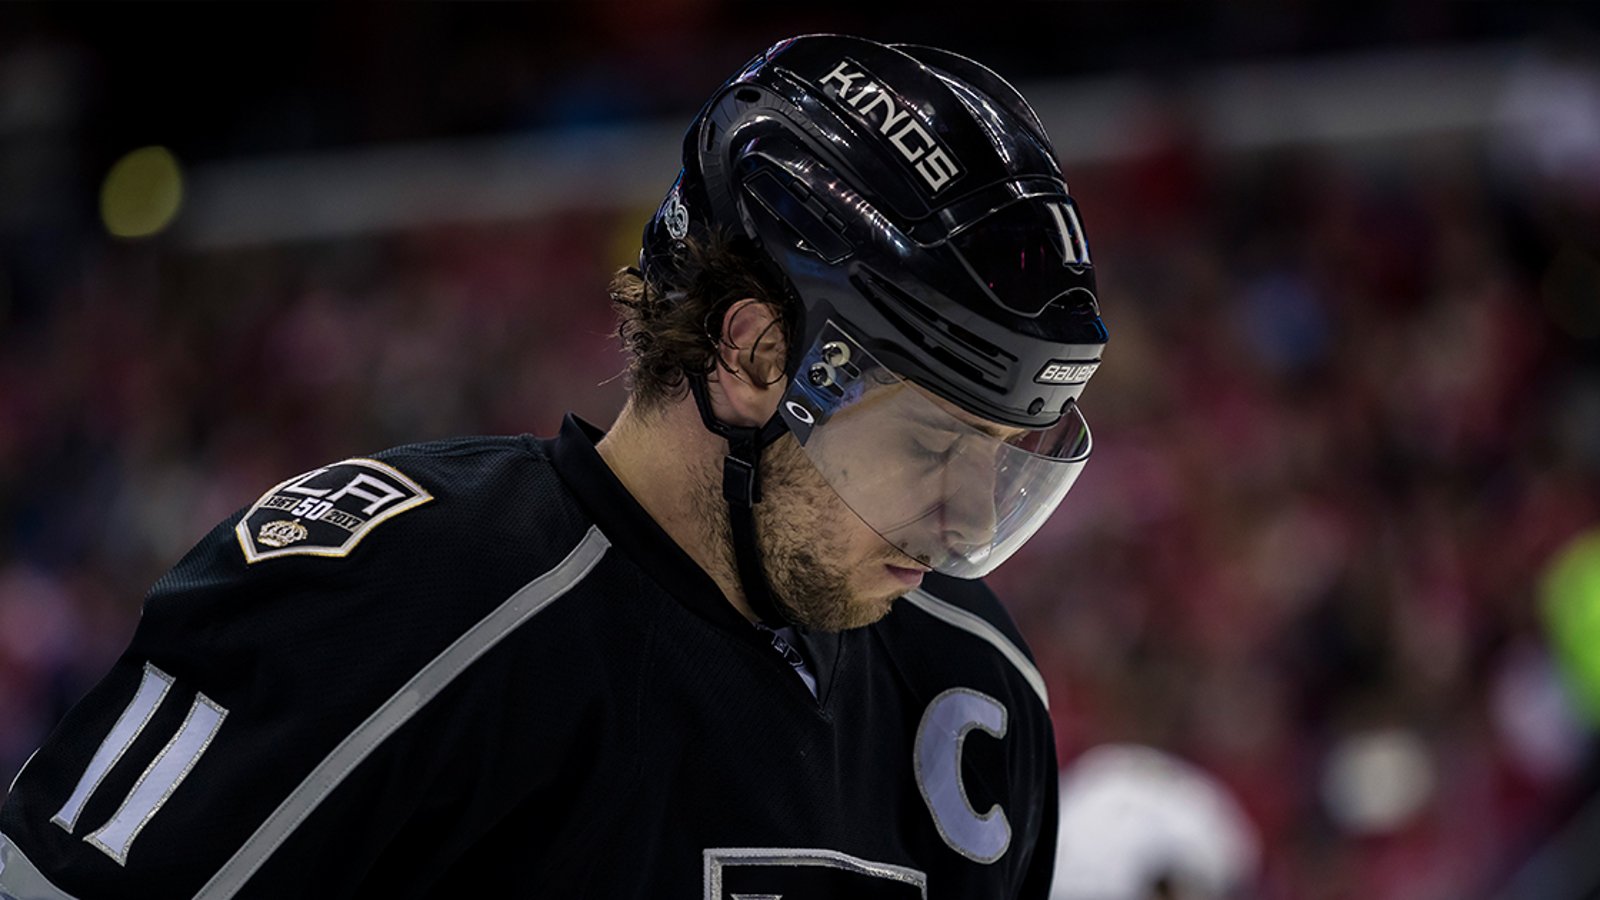 Report: Kopitar confirms concussion speculation